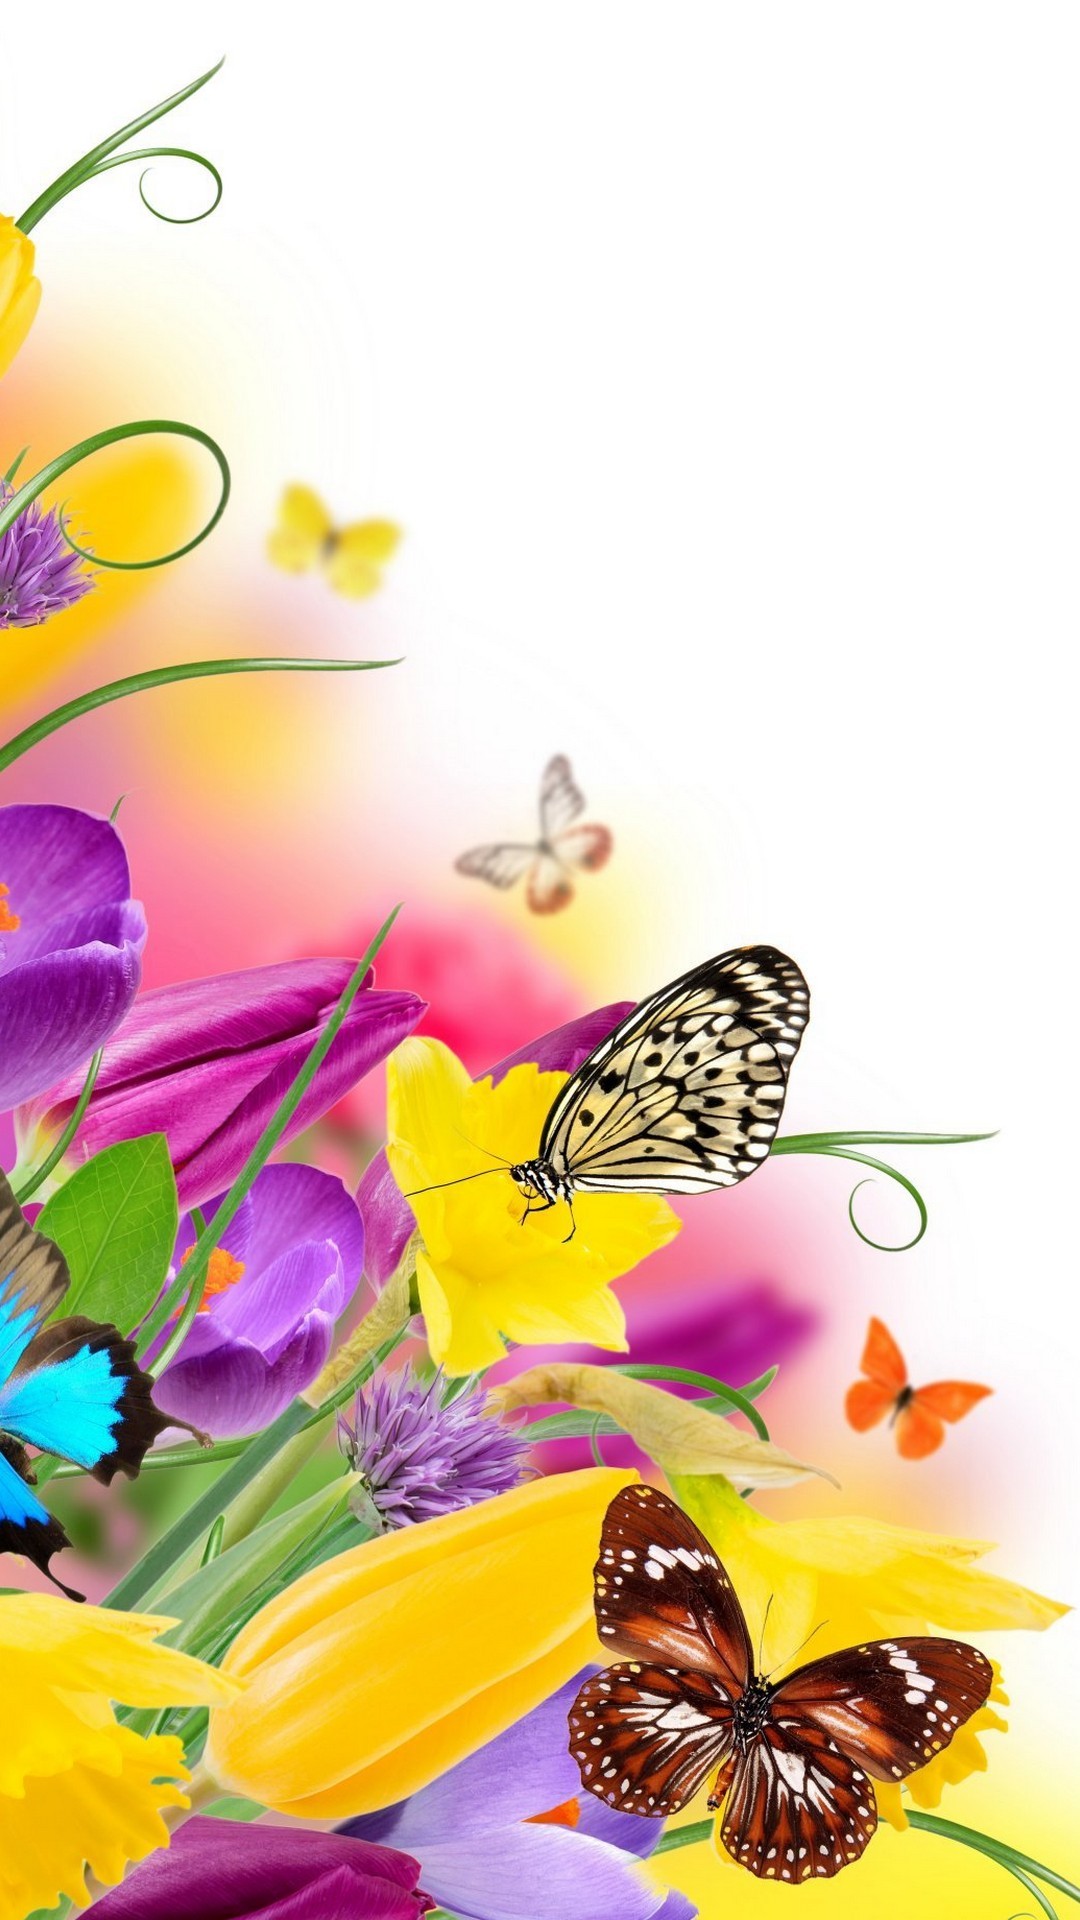 Wallpaper Cute Butterfly Android with HD resolution 1080x1920